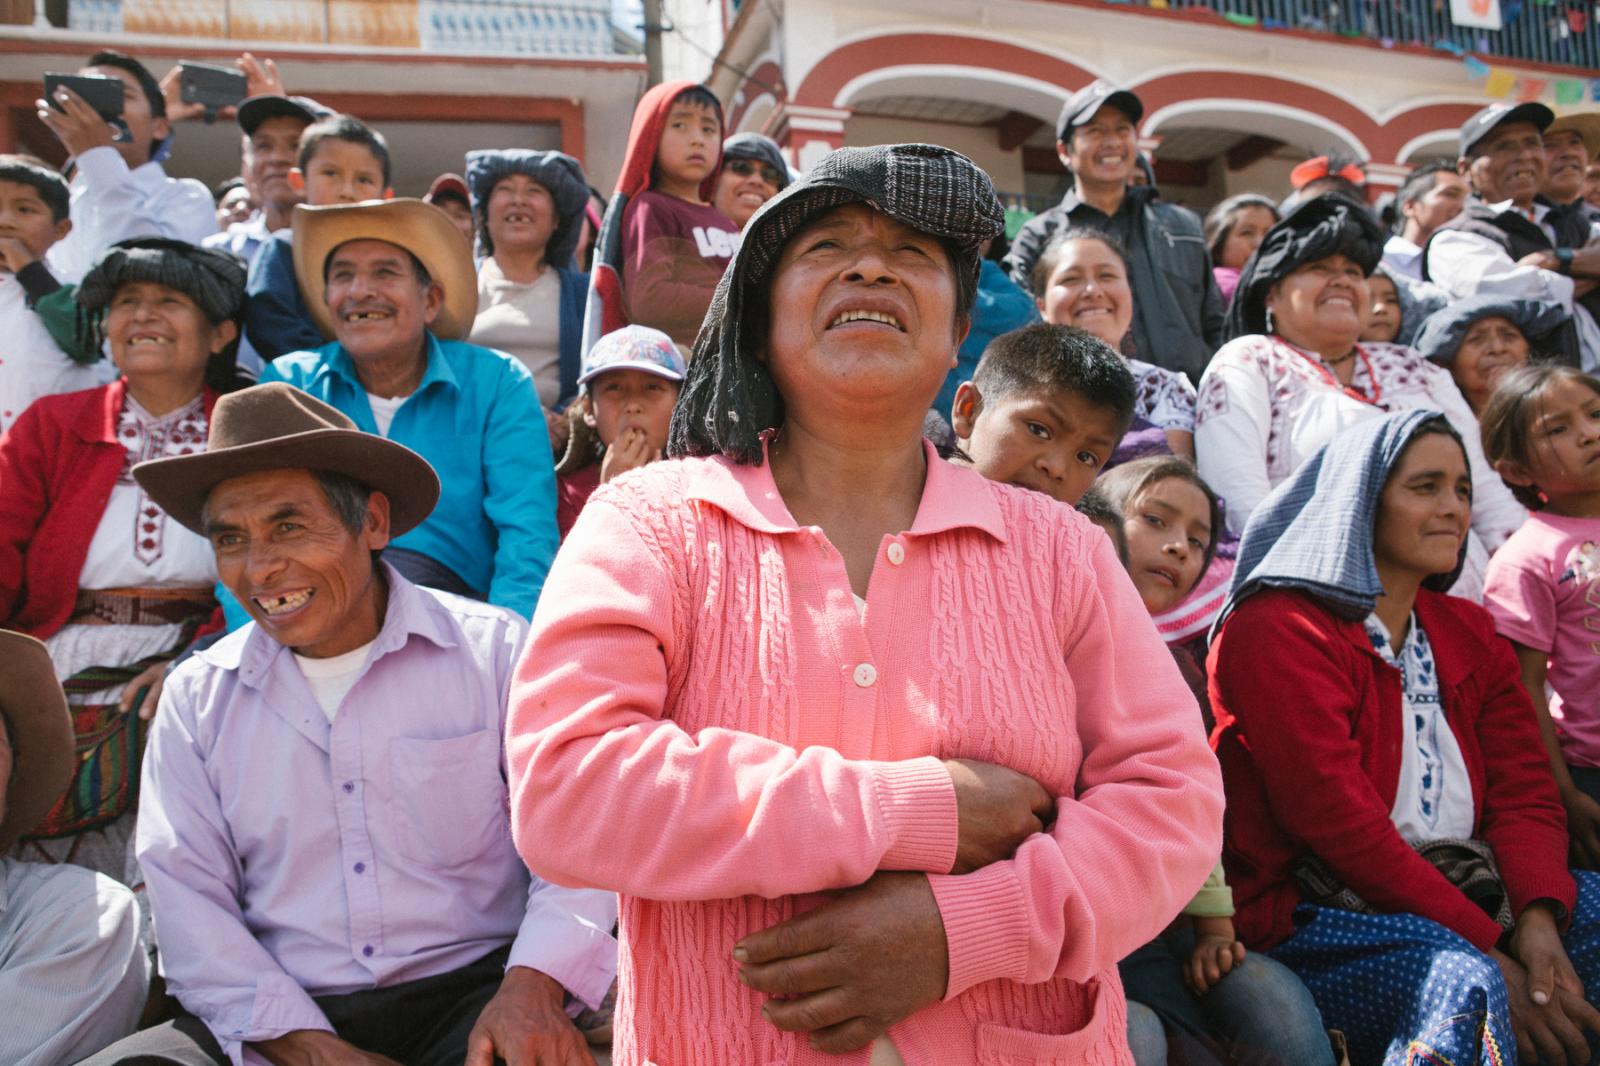 Image from Basketball in the Sierra Norte of Oaxaca - People gather around to watch bull riding or jaripeo...